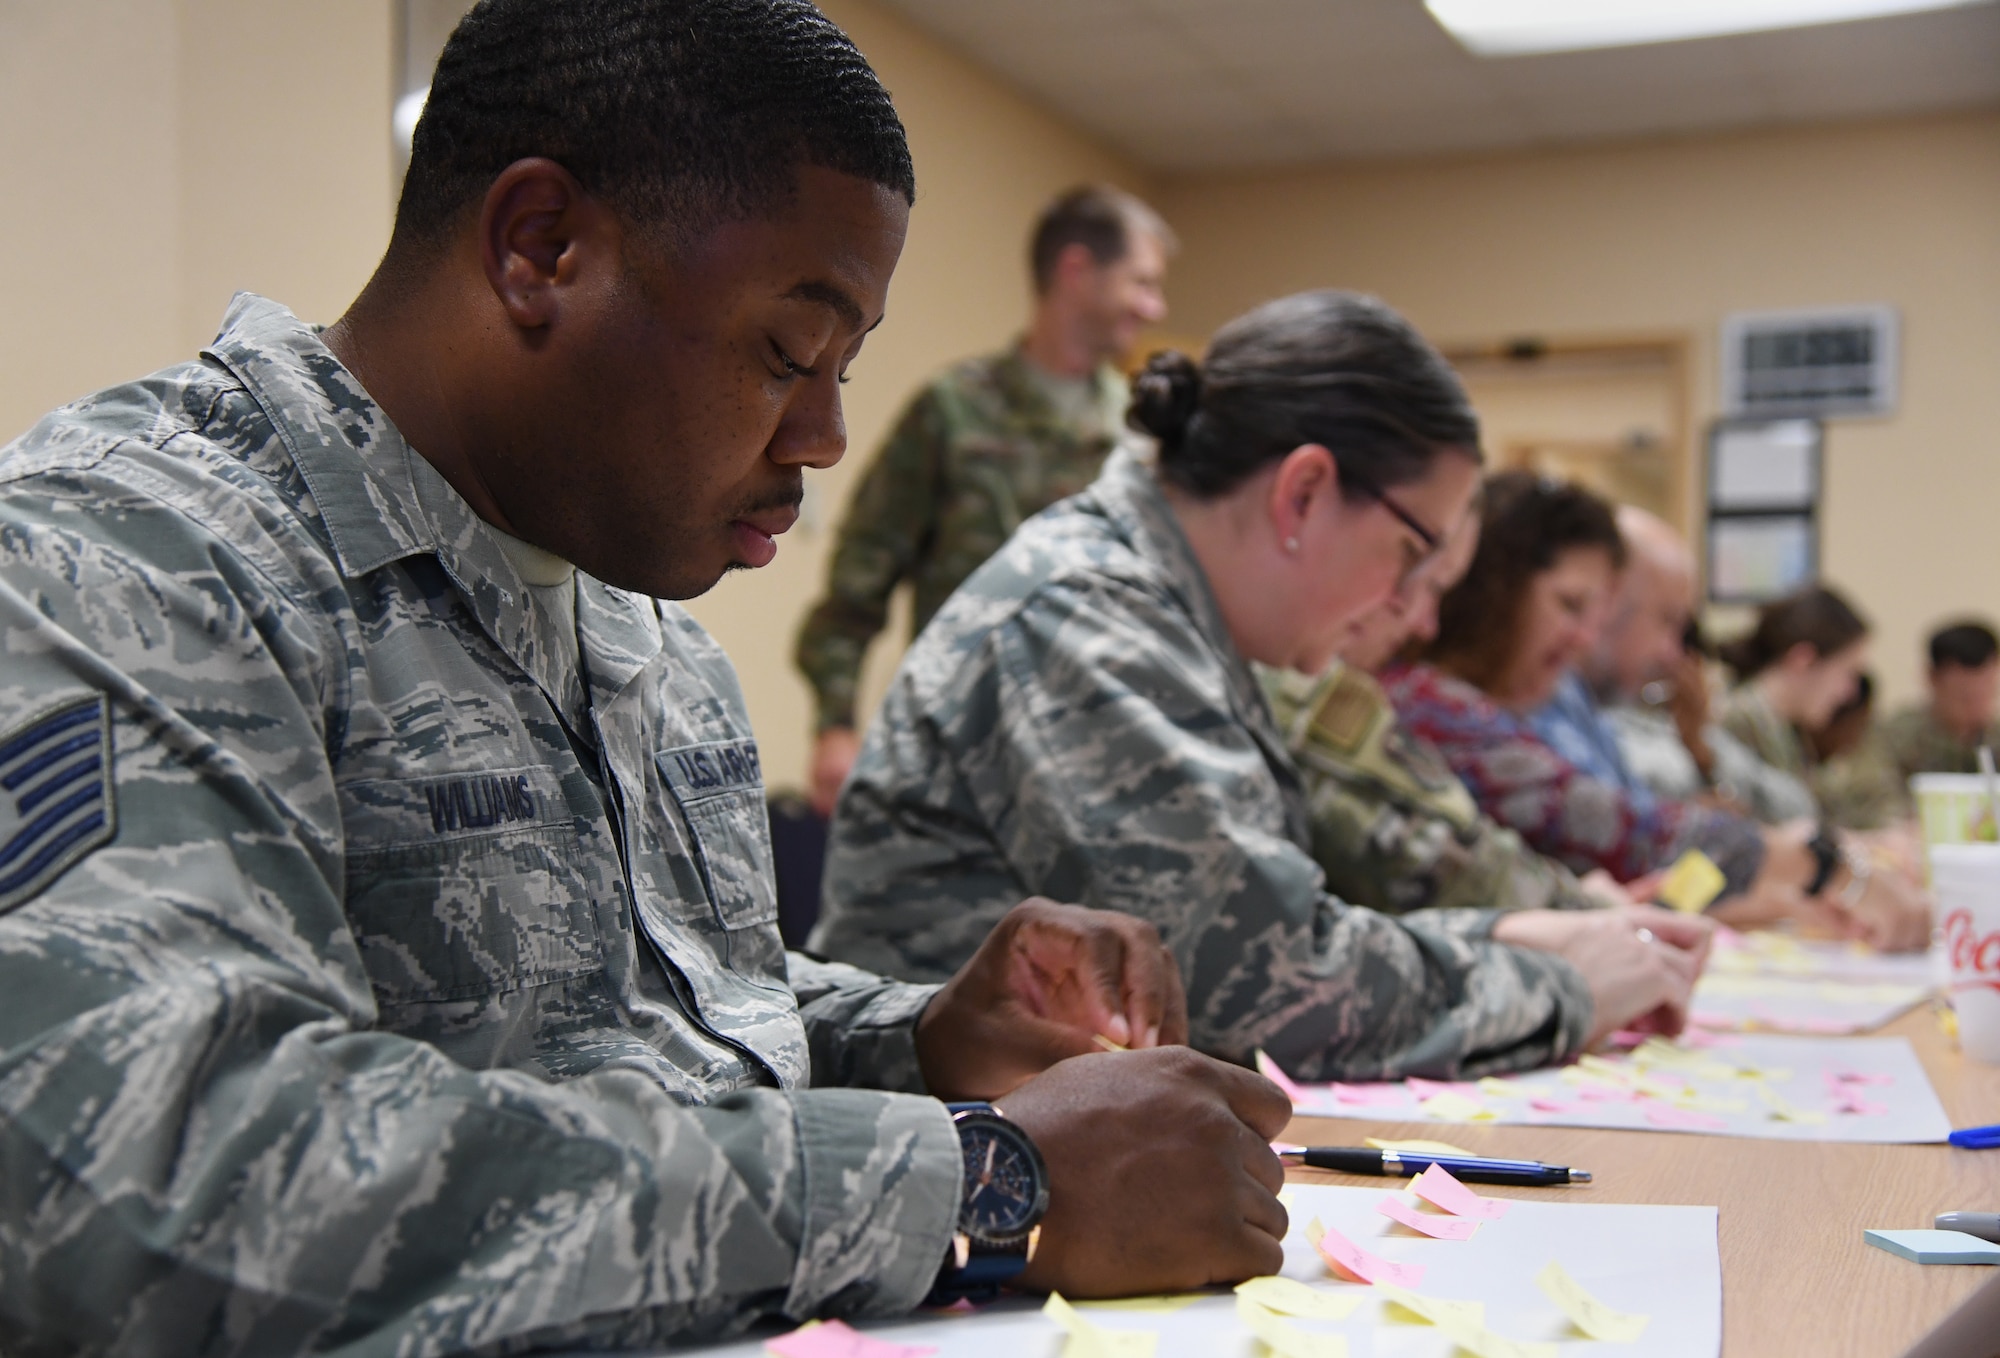 U.S. Air Force Tech. Sgt. Darrius Williams, 81st Aerospace Medicine Squadron emergency management NCO in charge, participates in "A Life-Mapping Experience" exercise during the Leadership Enhancement and Development Seminar inside the Airman Leadership School building at Keesler Air Force Base, Mississippi, Nov. 5, 2019. The three-day course, which is open to all supervisors, is meant to enhance effective communication, skillful interpersonal interaction and emotional intelligence in the military environment by using an active learning format that emphasizes discussion and minimizes lecture. (U.S. Air Force photo by Kemberly Groue)